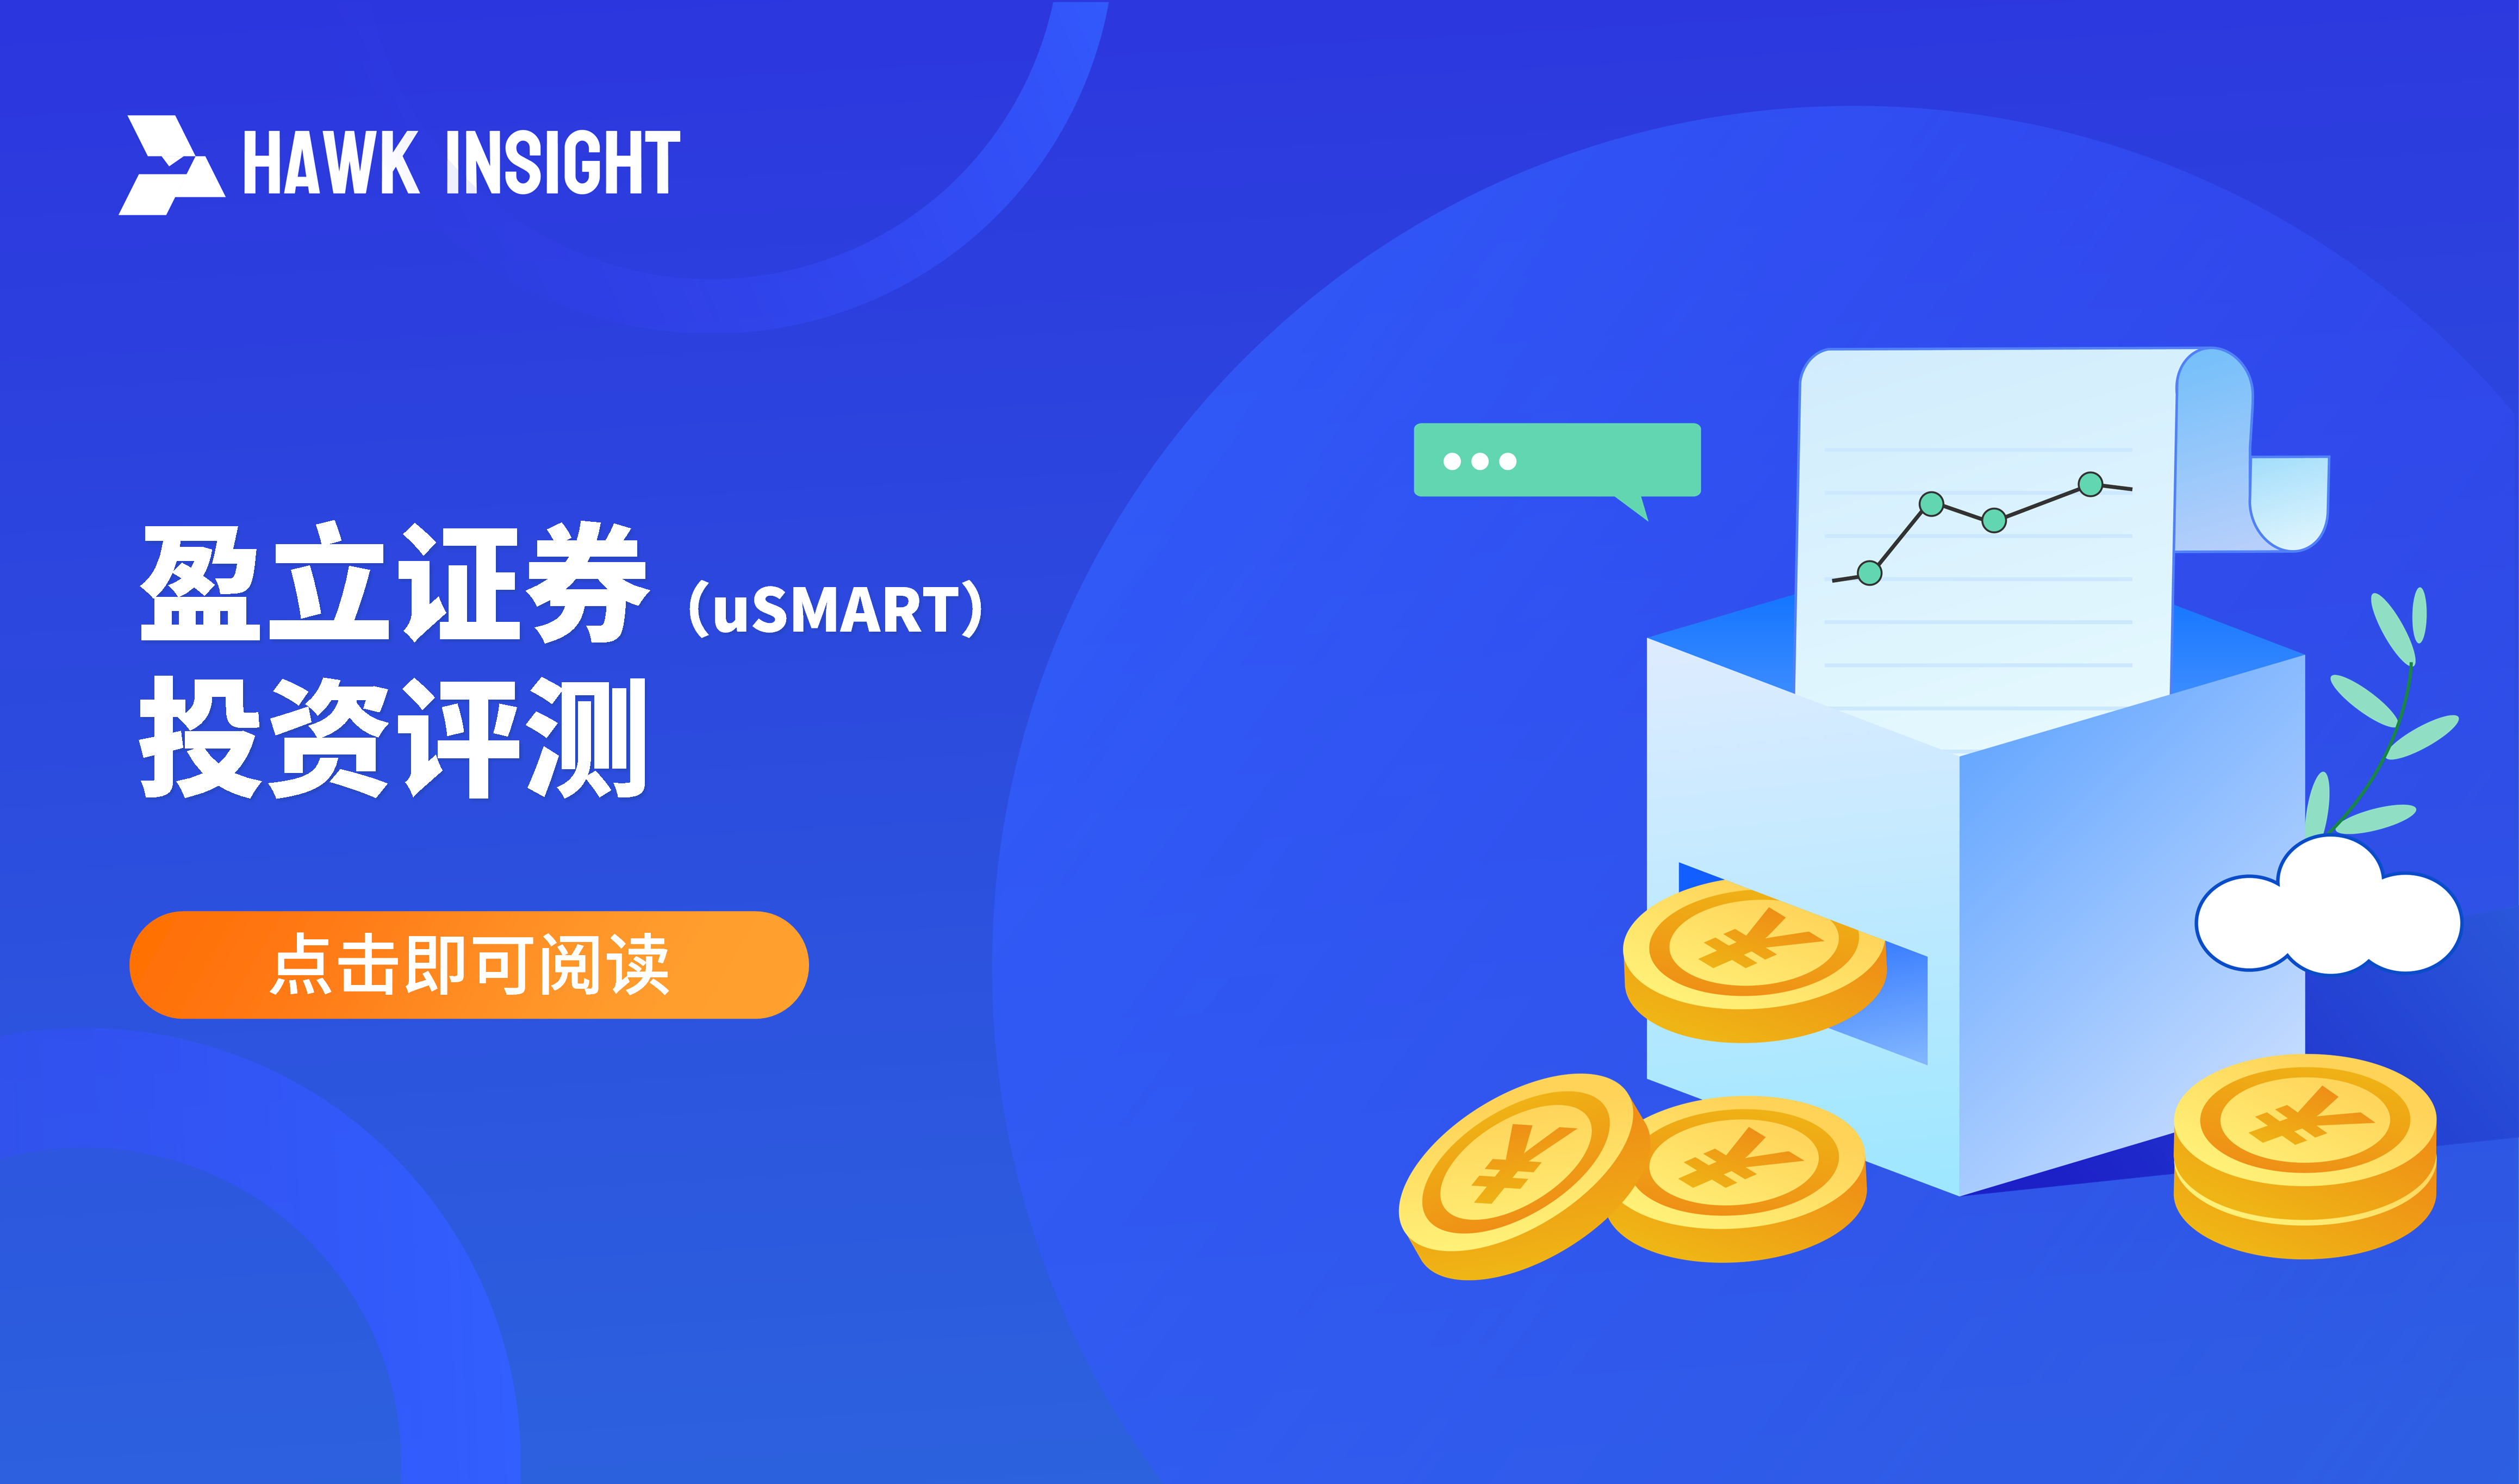 Yingli Securities (uSMART) Investment Review